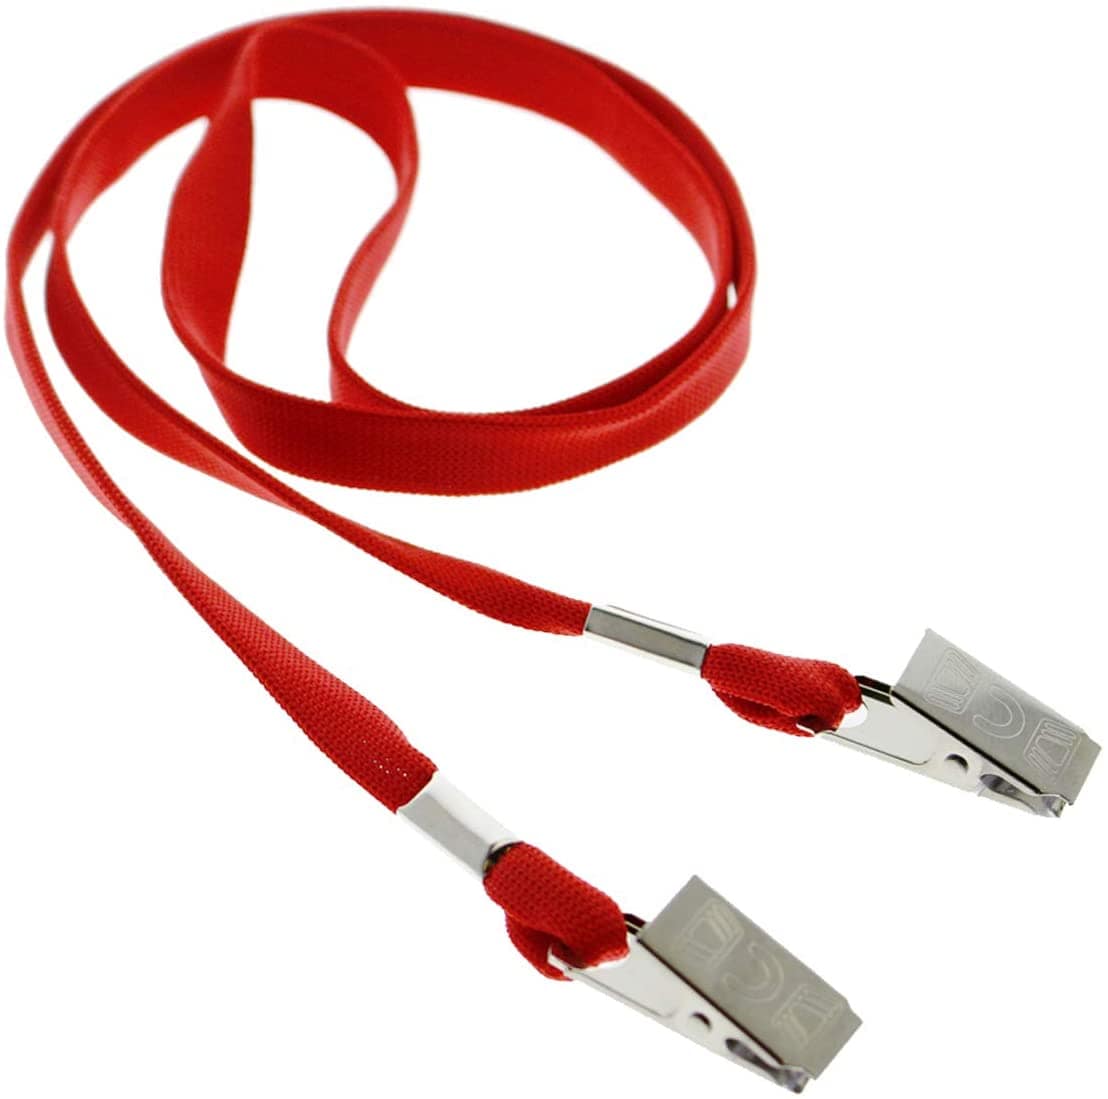 Red Premium Double Ended Lanyard for Events and Credentials - 2 Bulldog Clips / No Twist Lanyard (NBAL38-2BC) NBAL38-2BC-RED